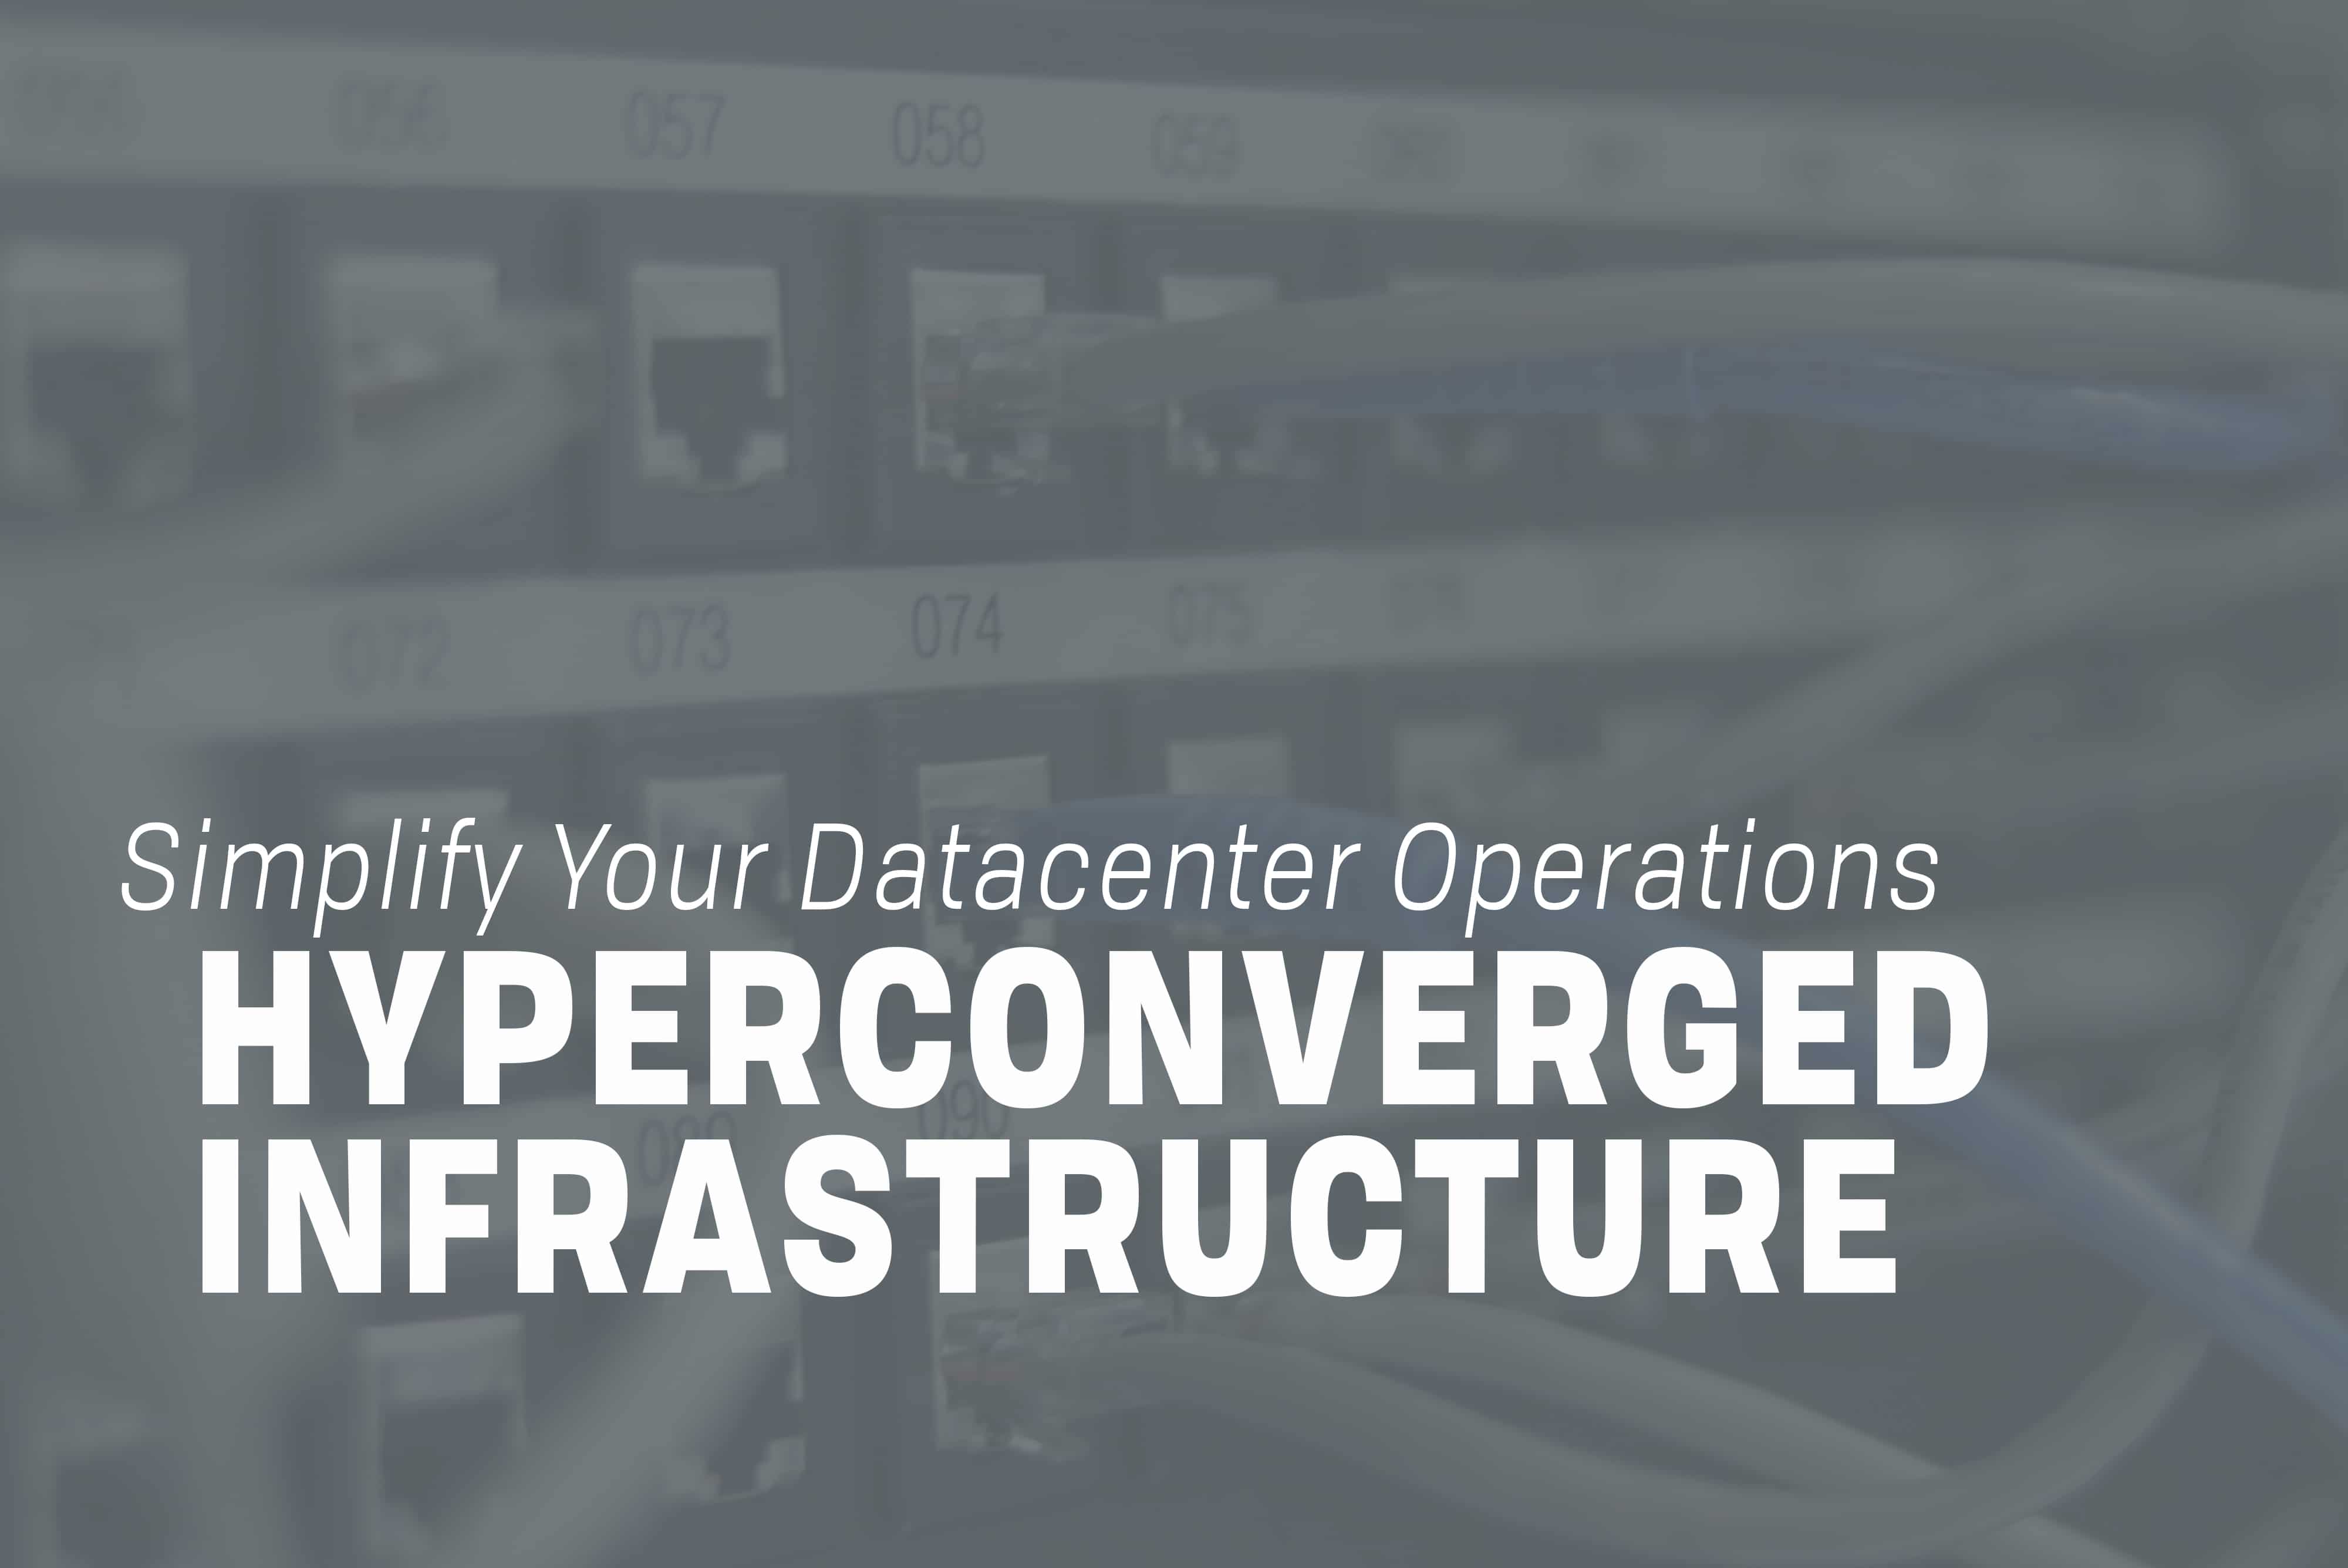 You are currently viewing A Hyperconverged Infrastructure (HCI) Simplifies Datacenter Operations (Infographic Inside)